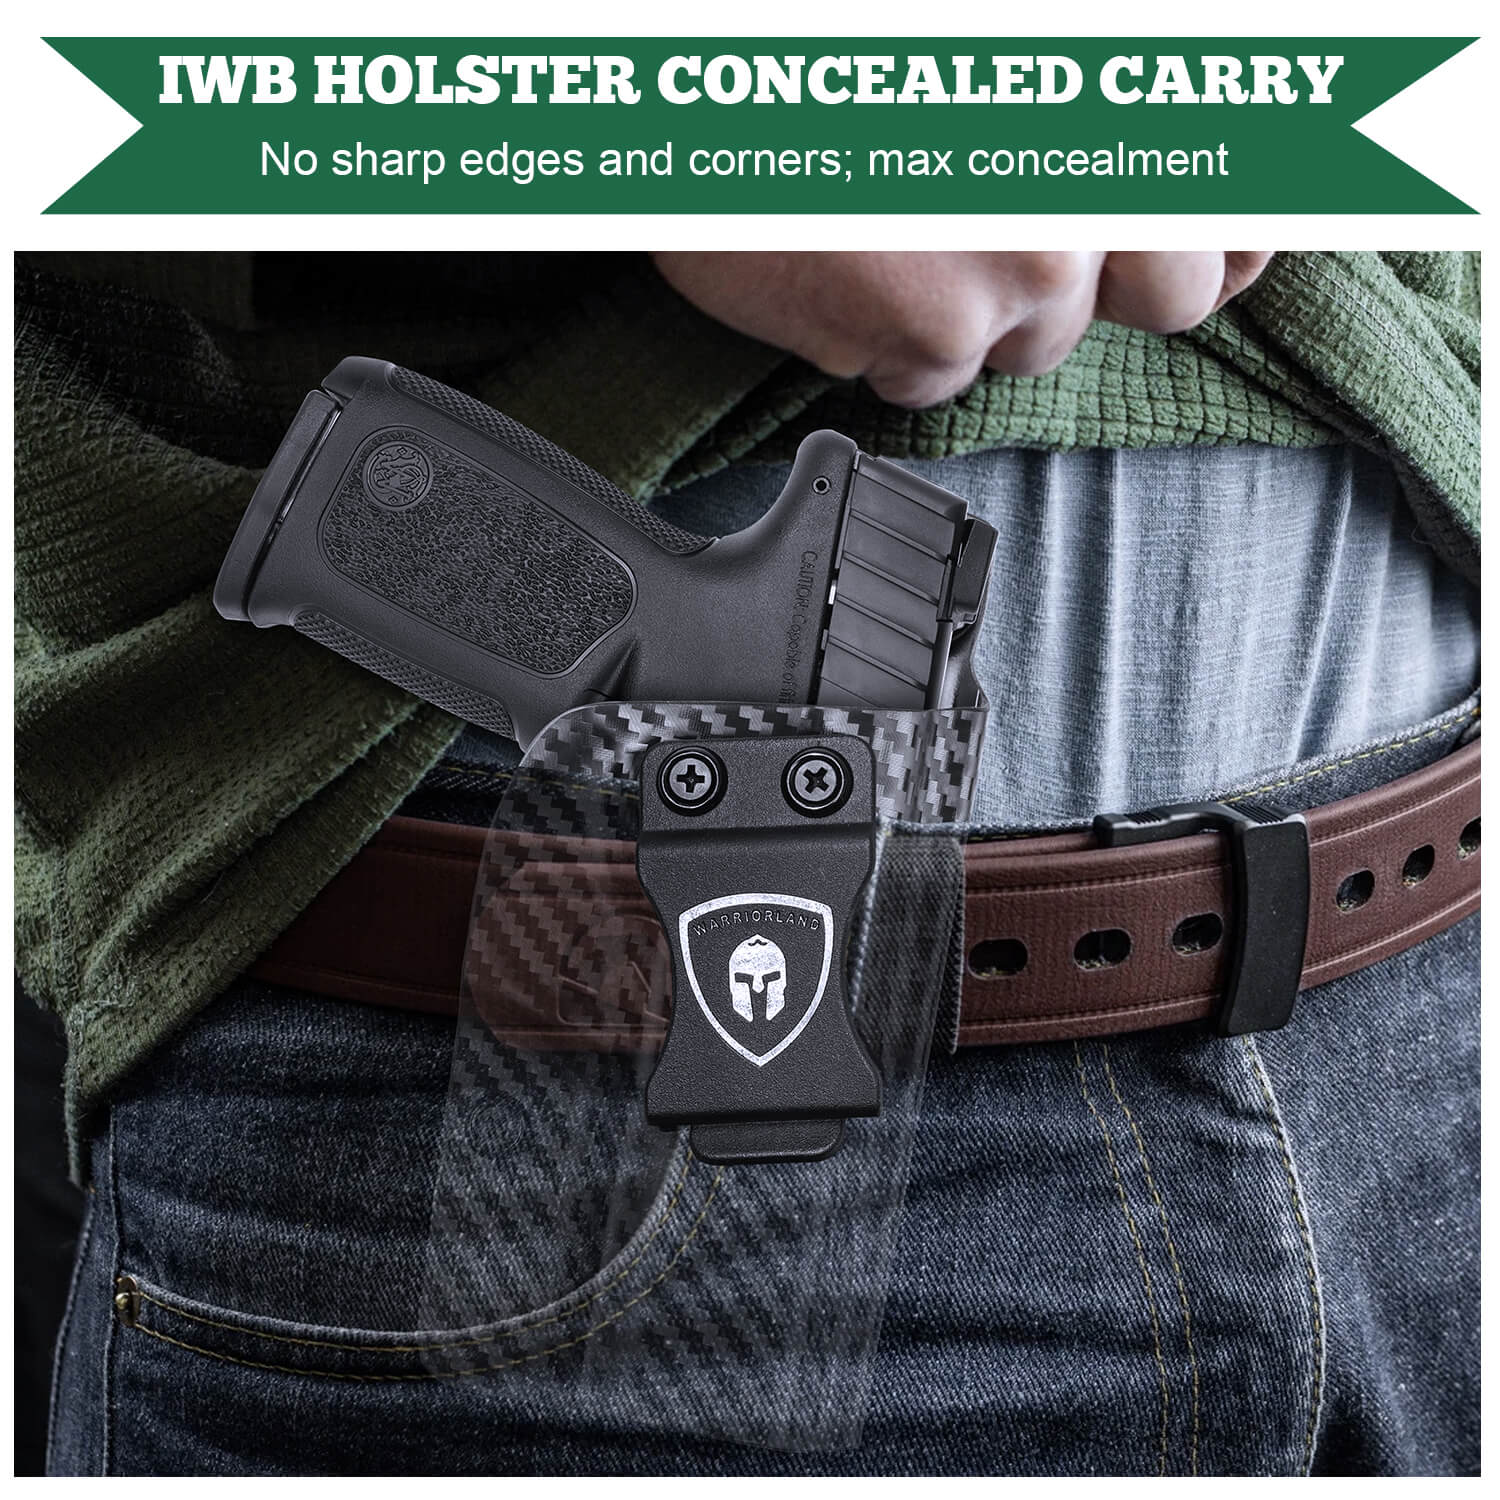 Carbon Fiber Kydex Smith & Wesson SD9 SD40 VE IWB Concealed Carry Holster | WARRIORLAND